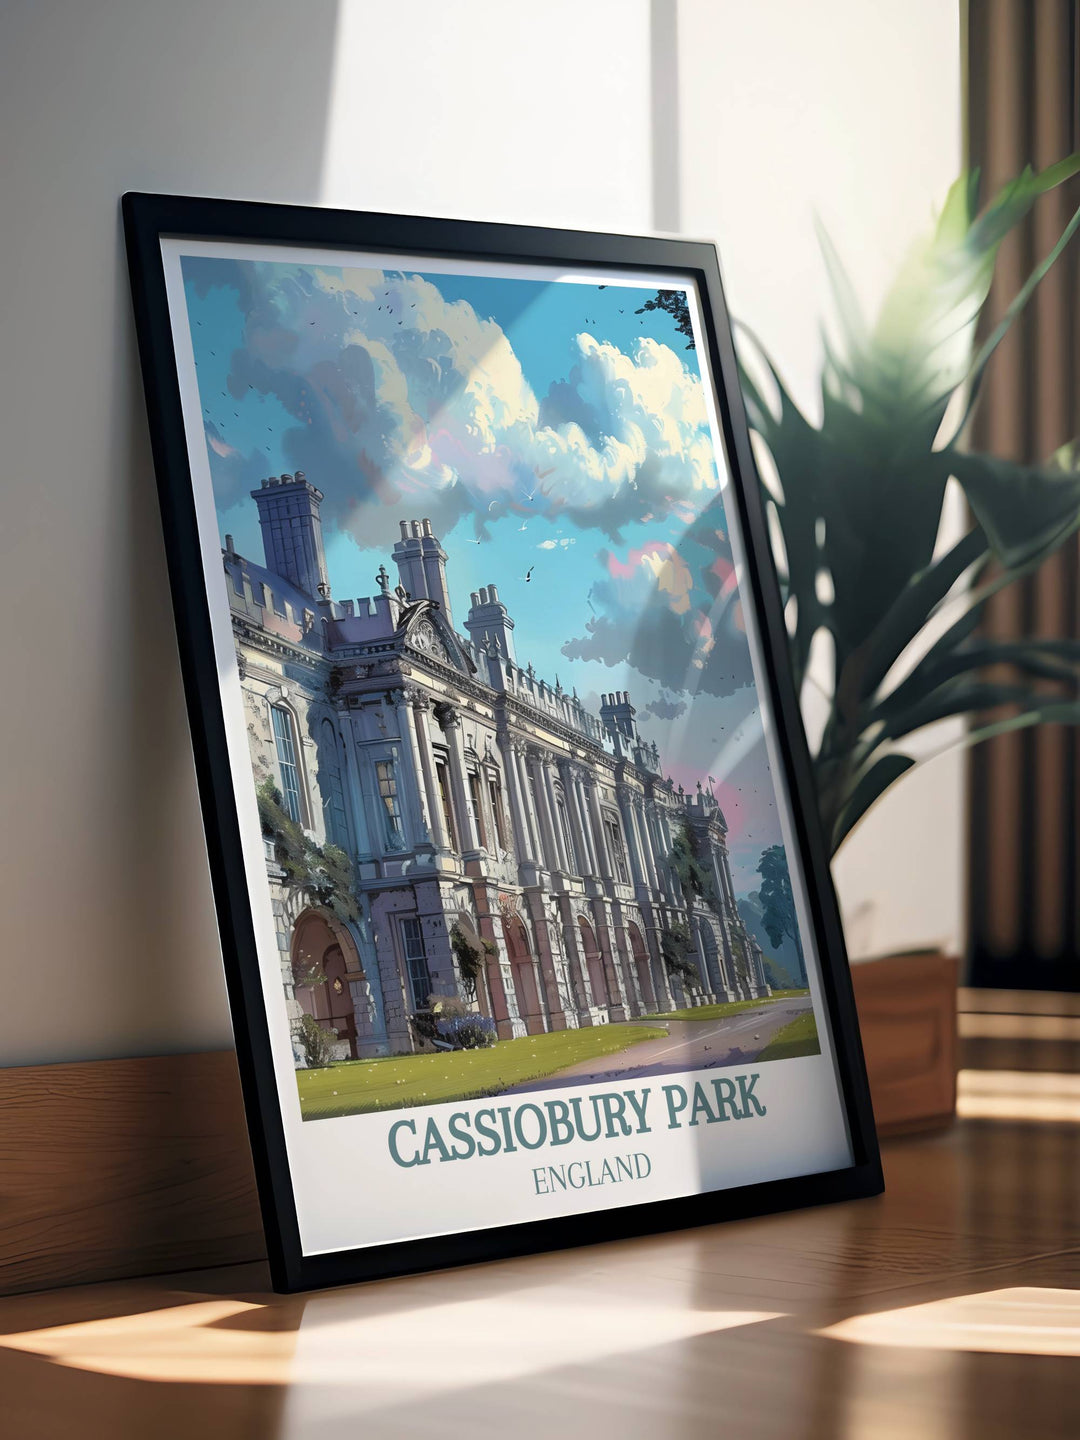 Cassiobury Park Mansion under a starry night sky, creating a mystical and enchanting scene for a unique wall décor piece